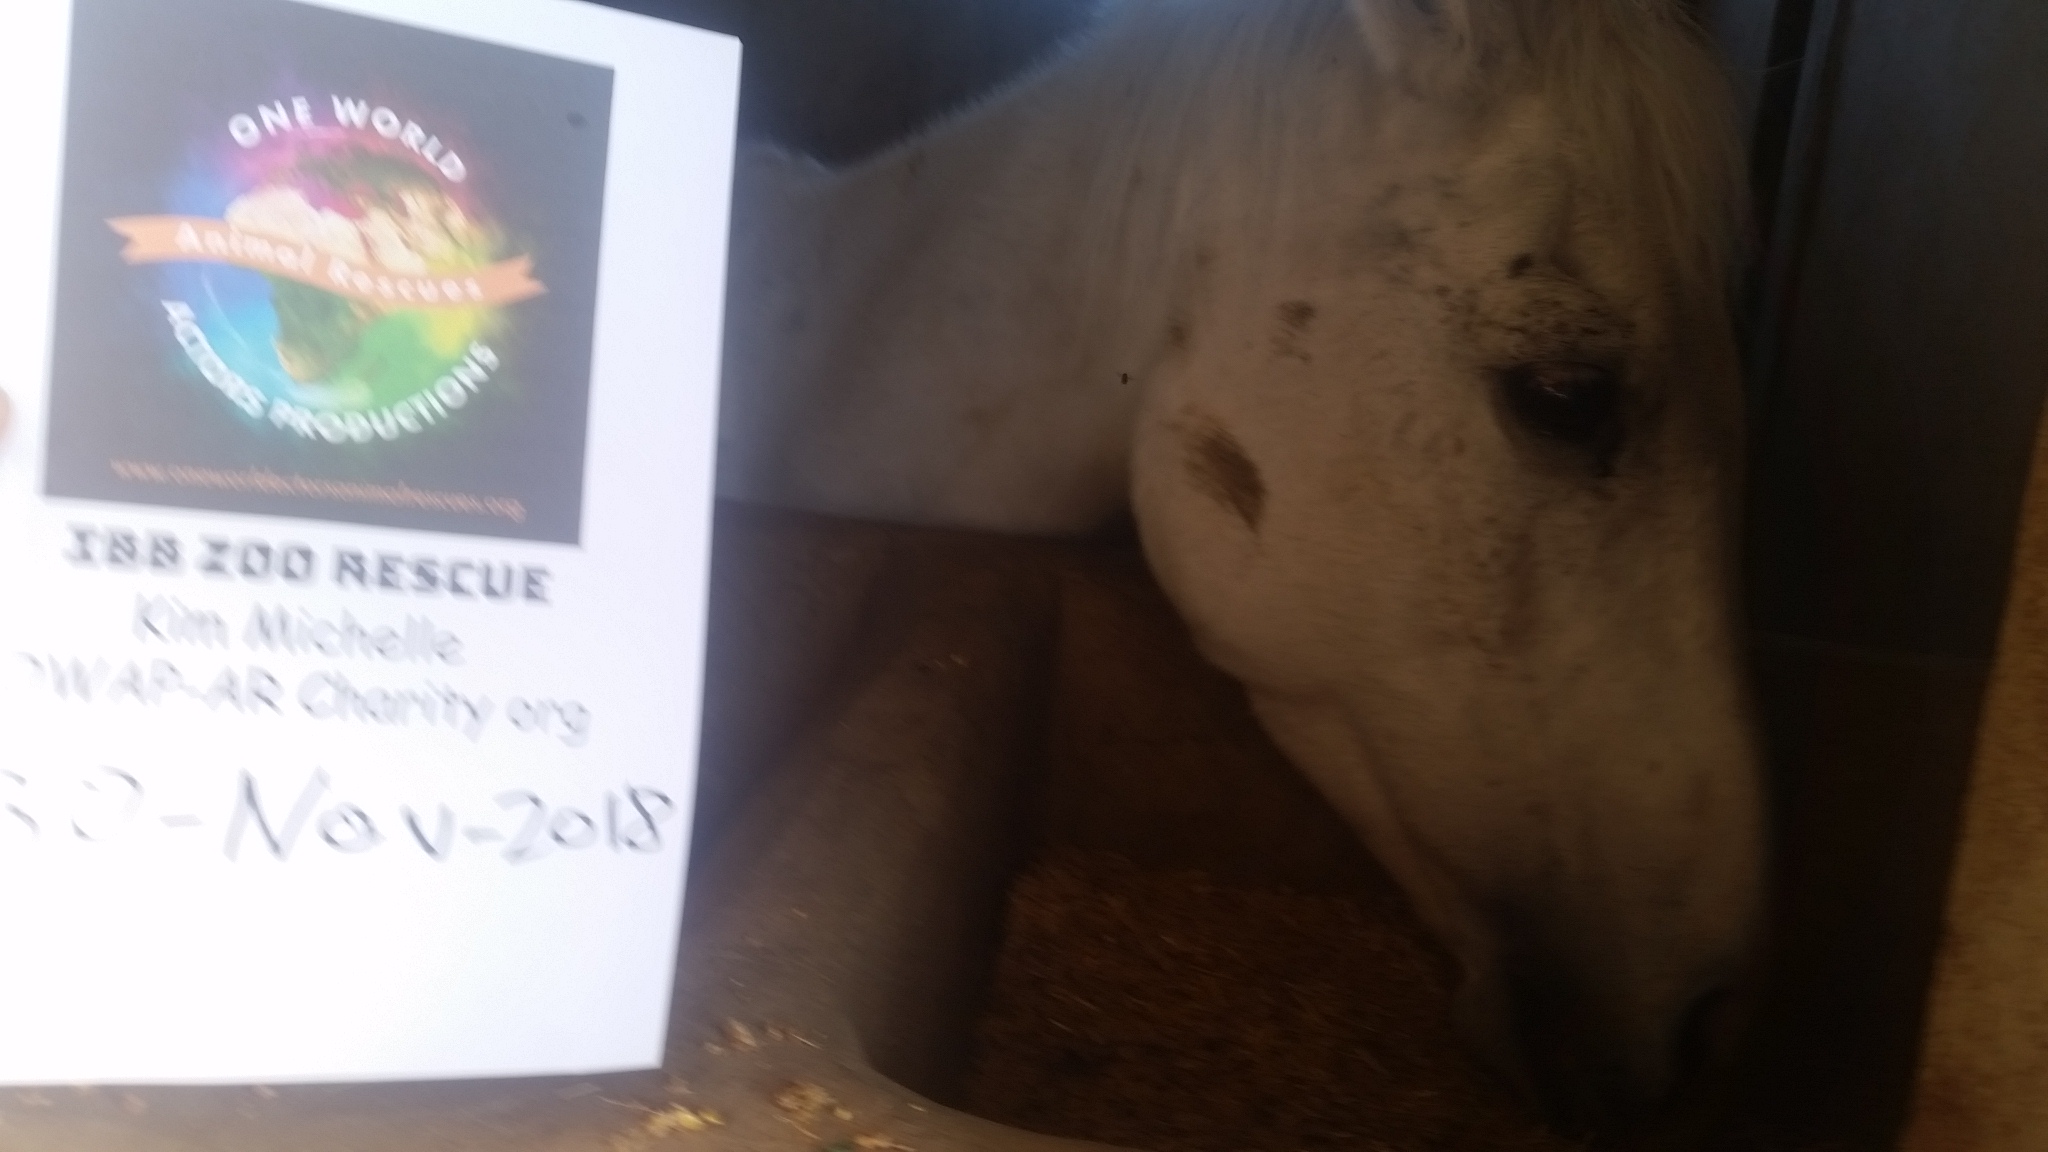 qrab 30 NOV 2018 OWAP-AR horse rescue eating right date wrong sign name.jpg